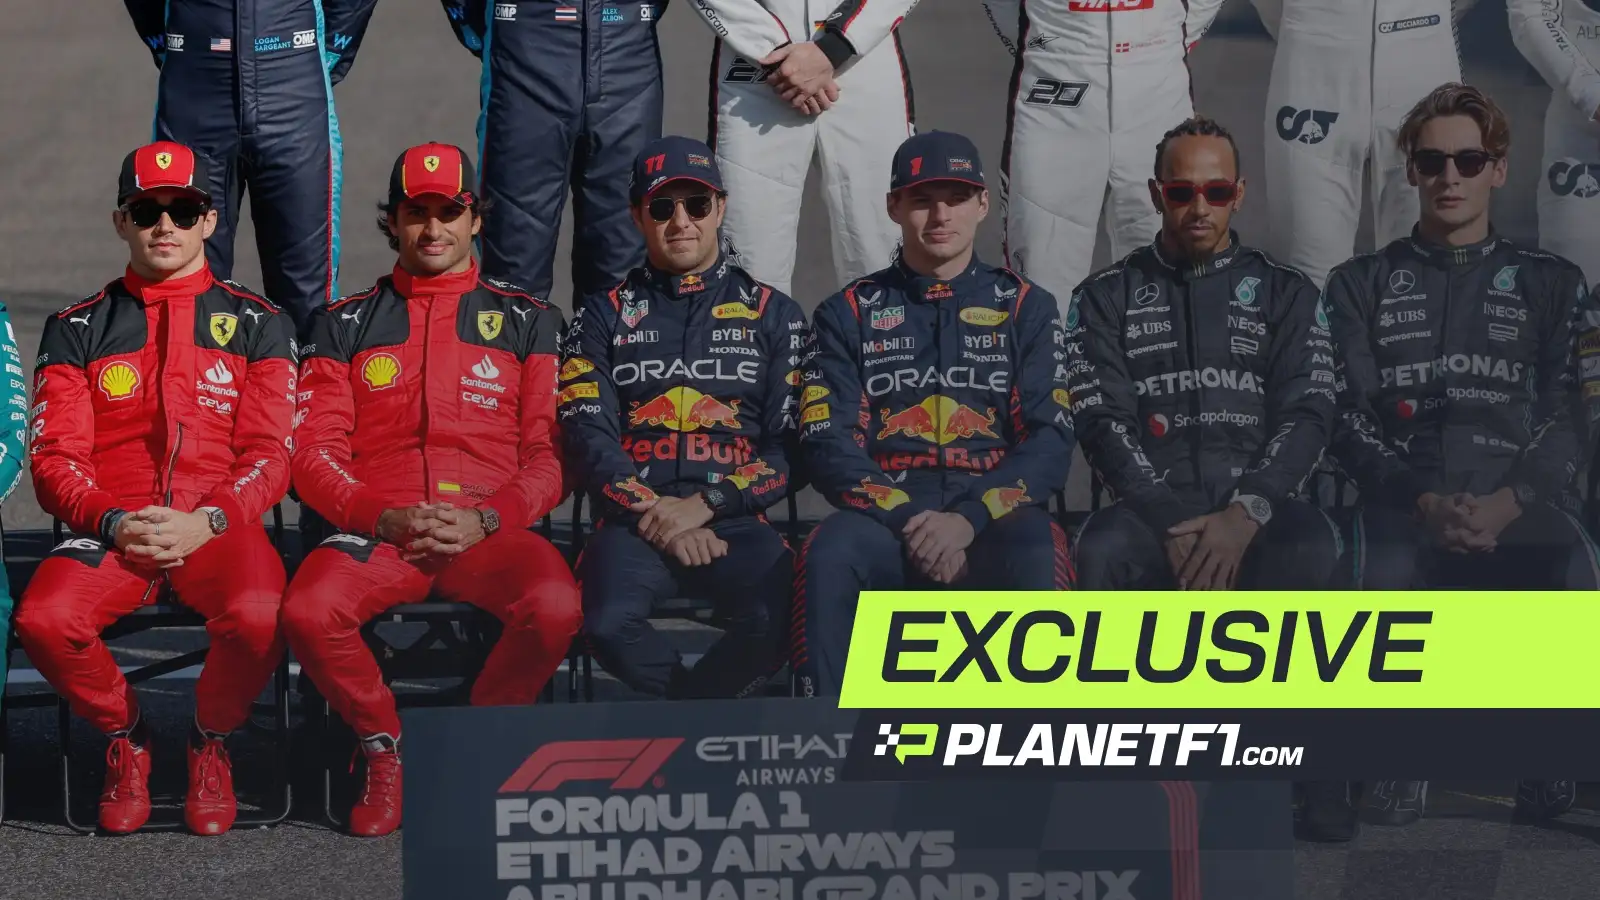 The F1 drivers taking a group photo.